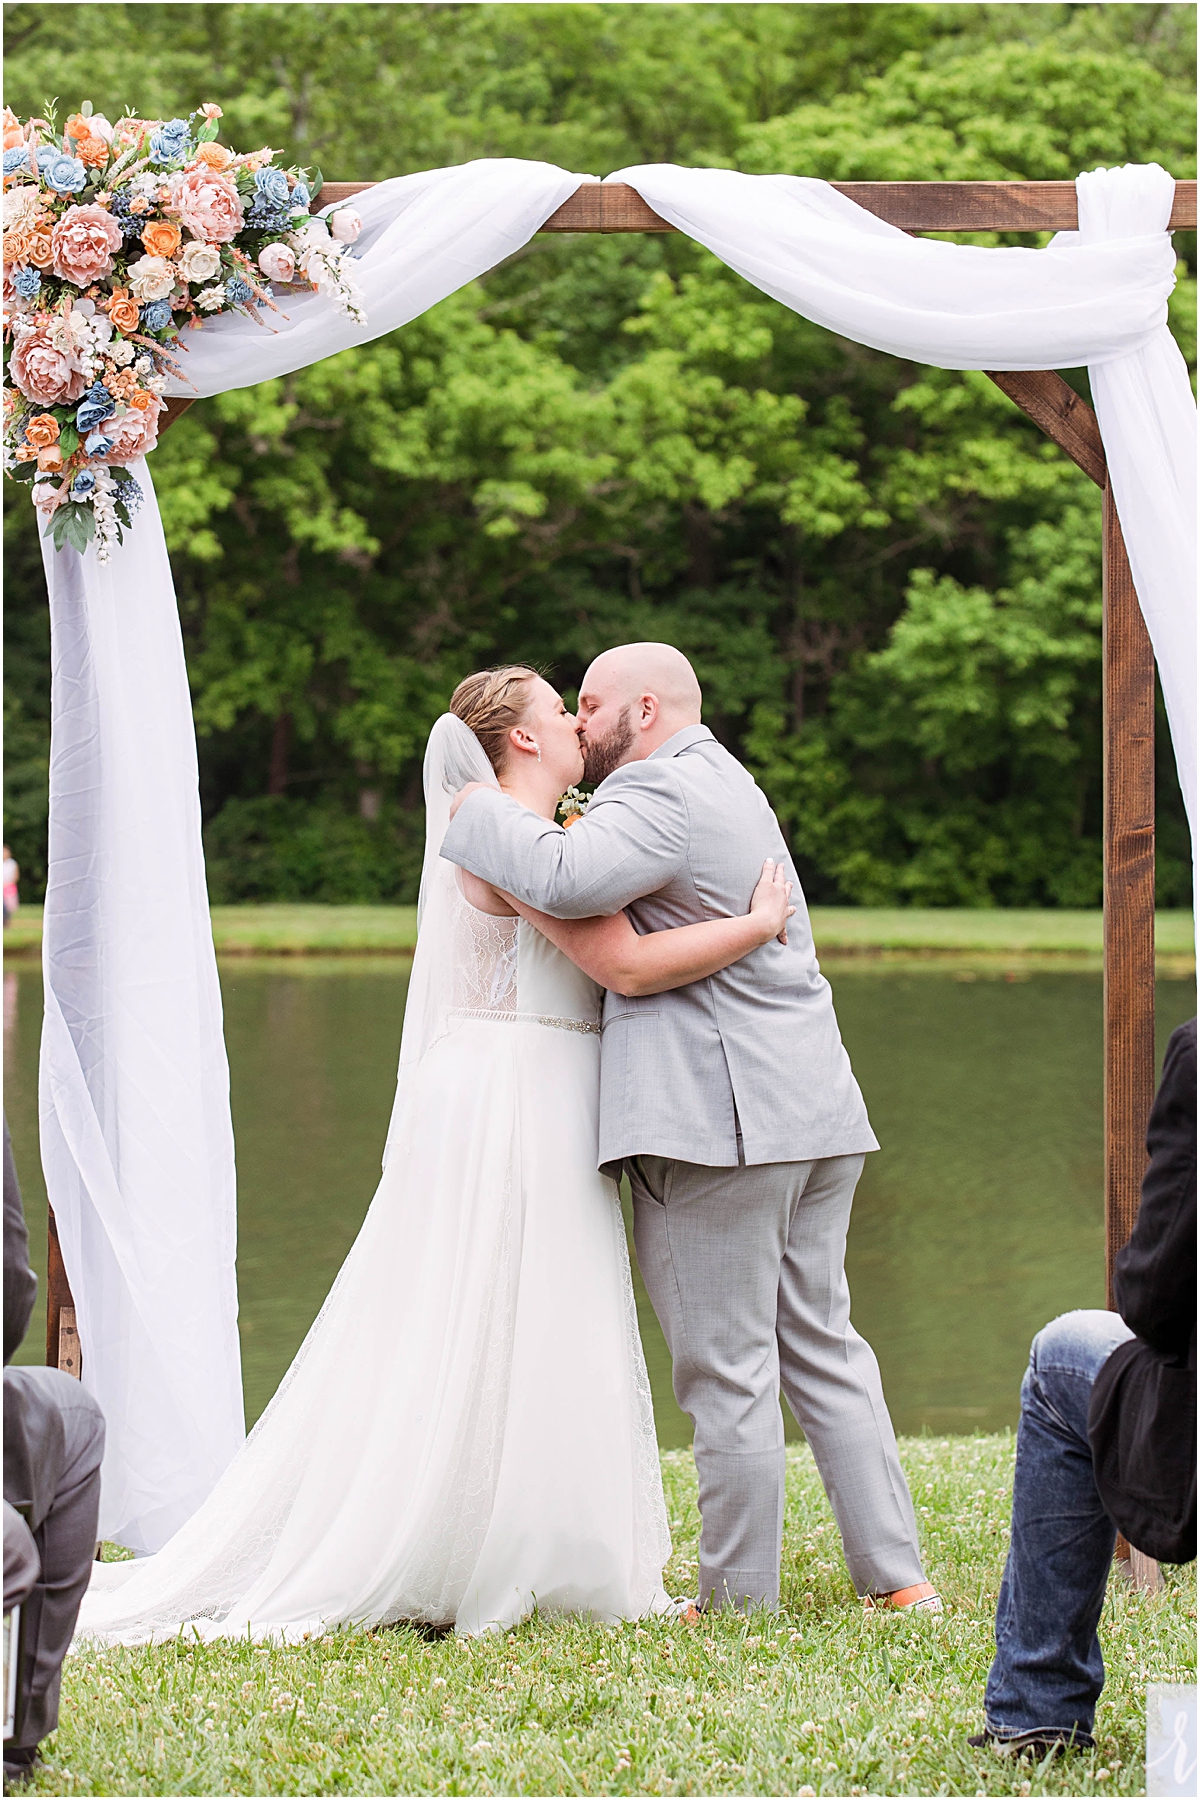 Anneliese and Alec share their first kiss as husband and wife in front of the pond at Poor Farm House Park.